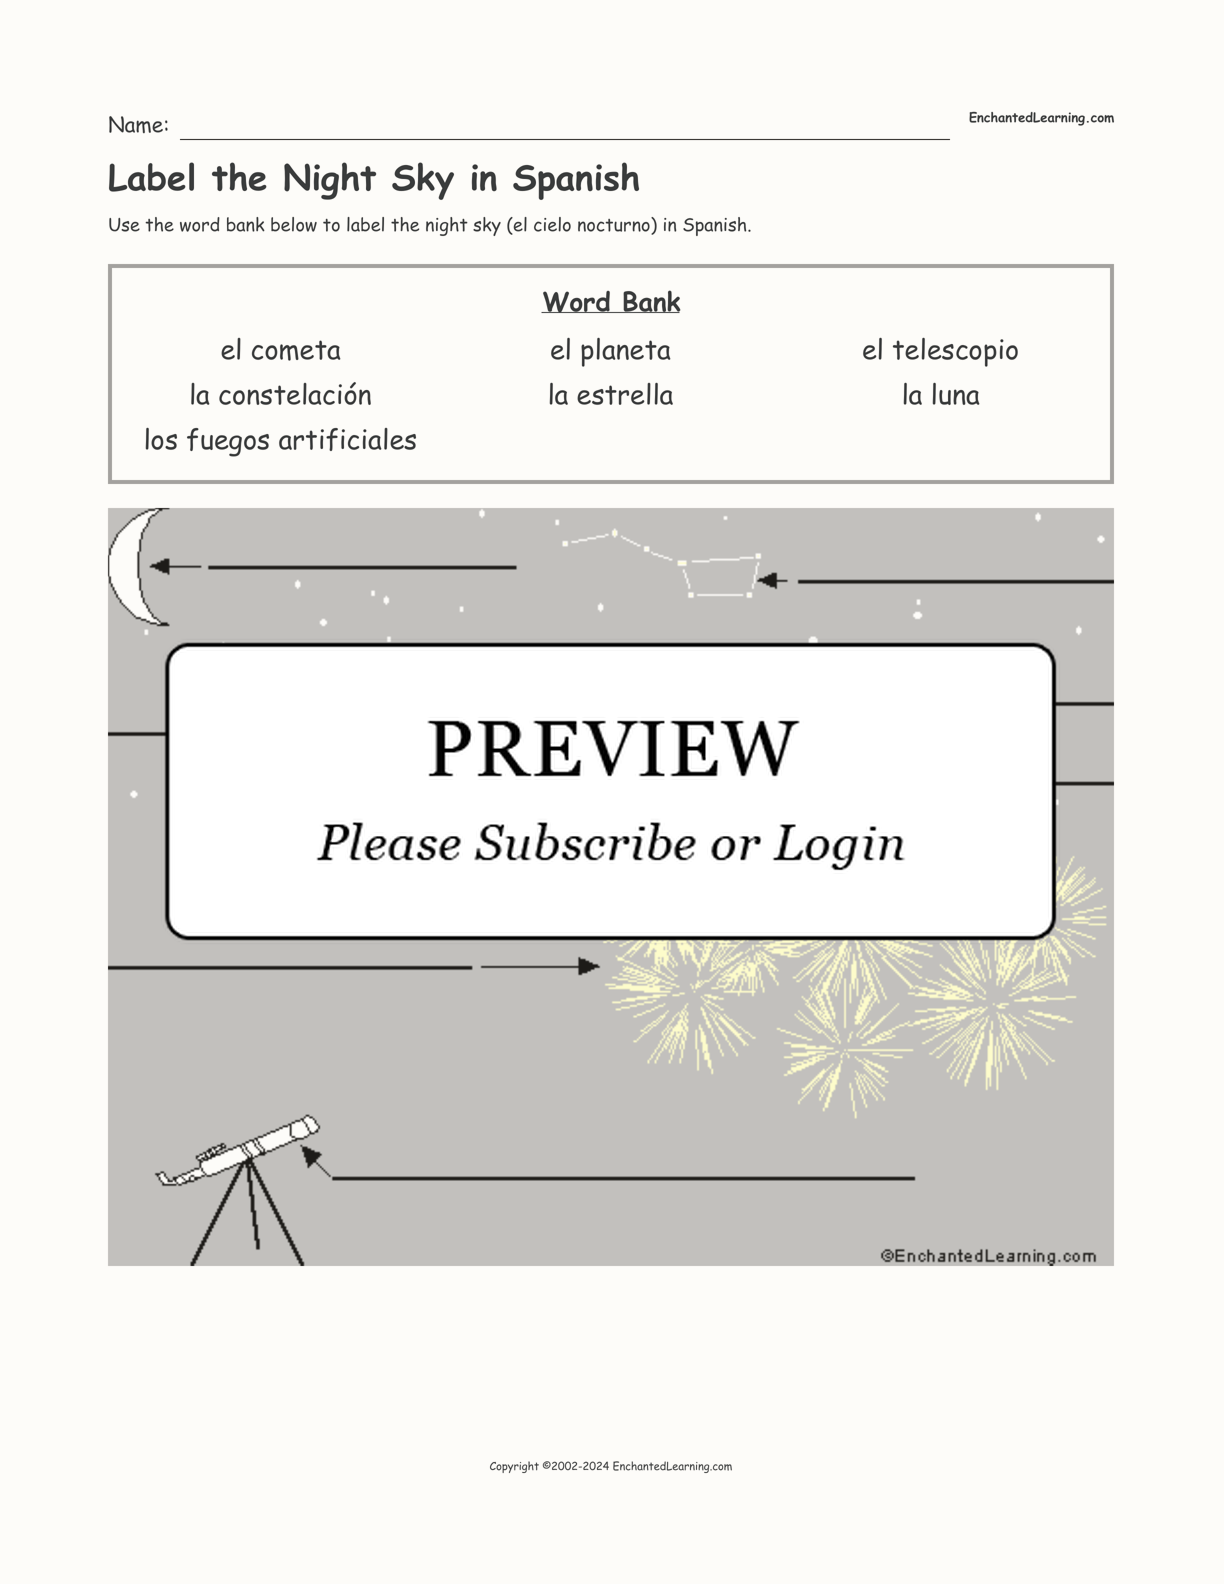 Label the Night Sky in Spanish interactive worksheet page 1